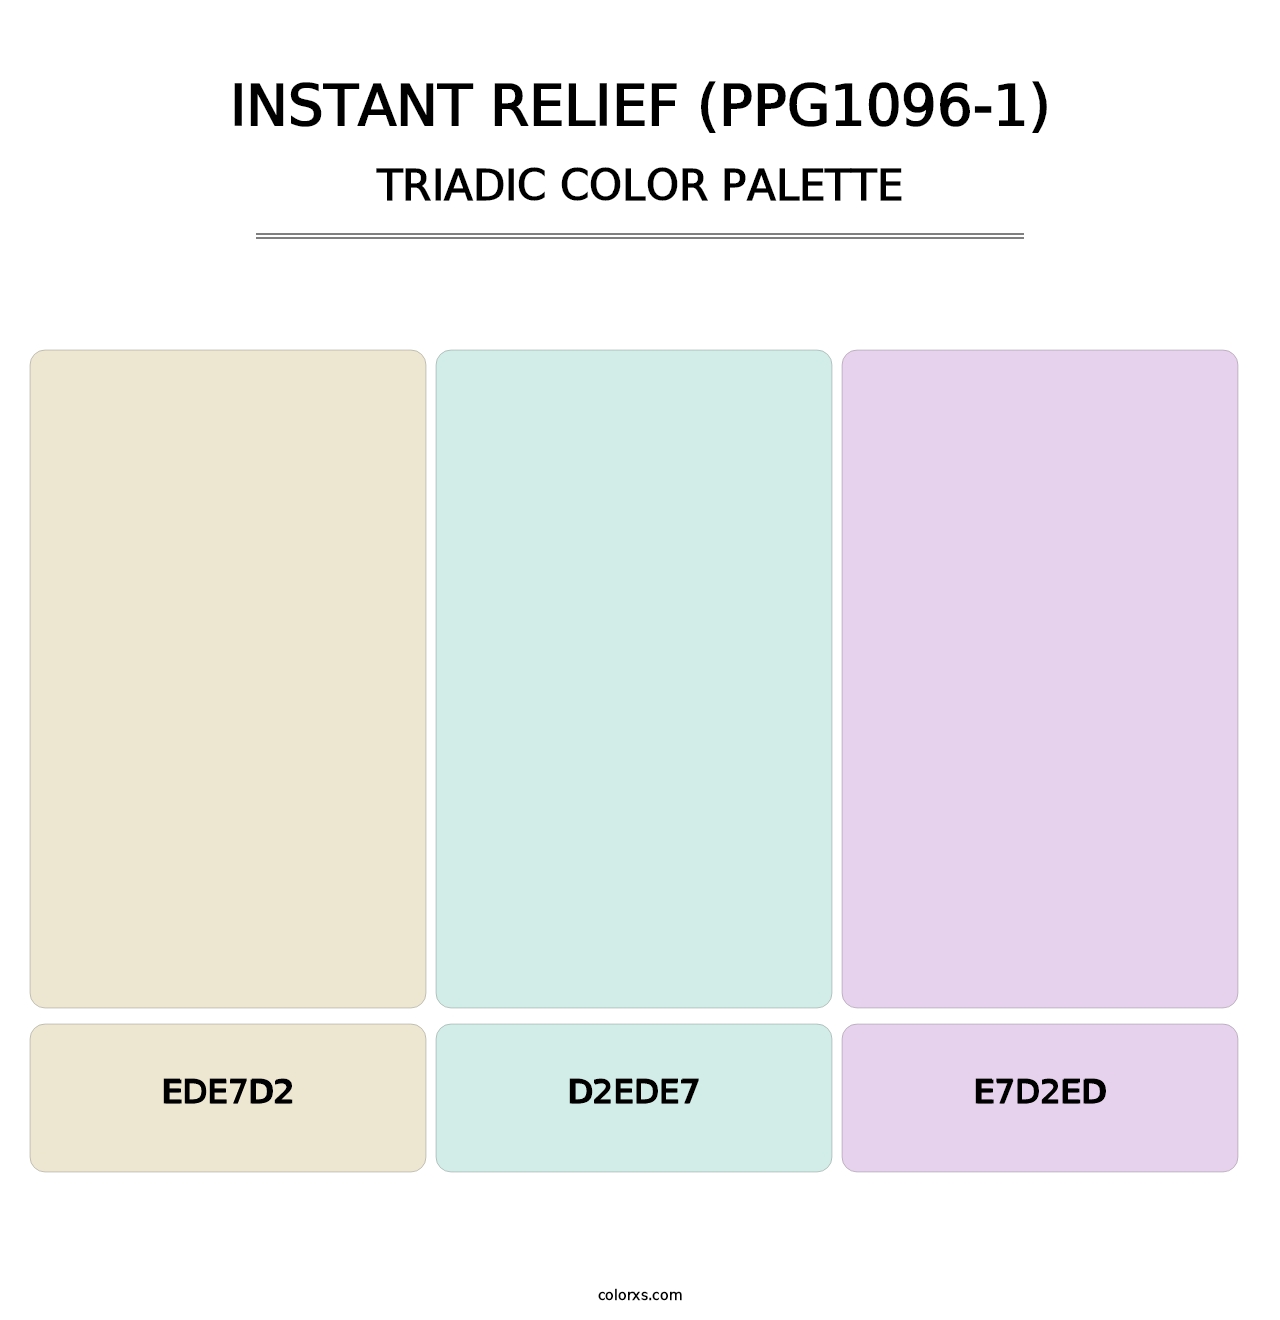 Instant Relief (PPG1096-1) - Triadic Color Palette